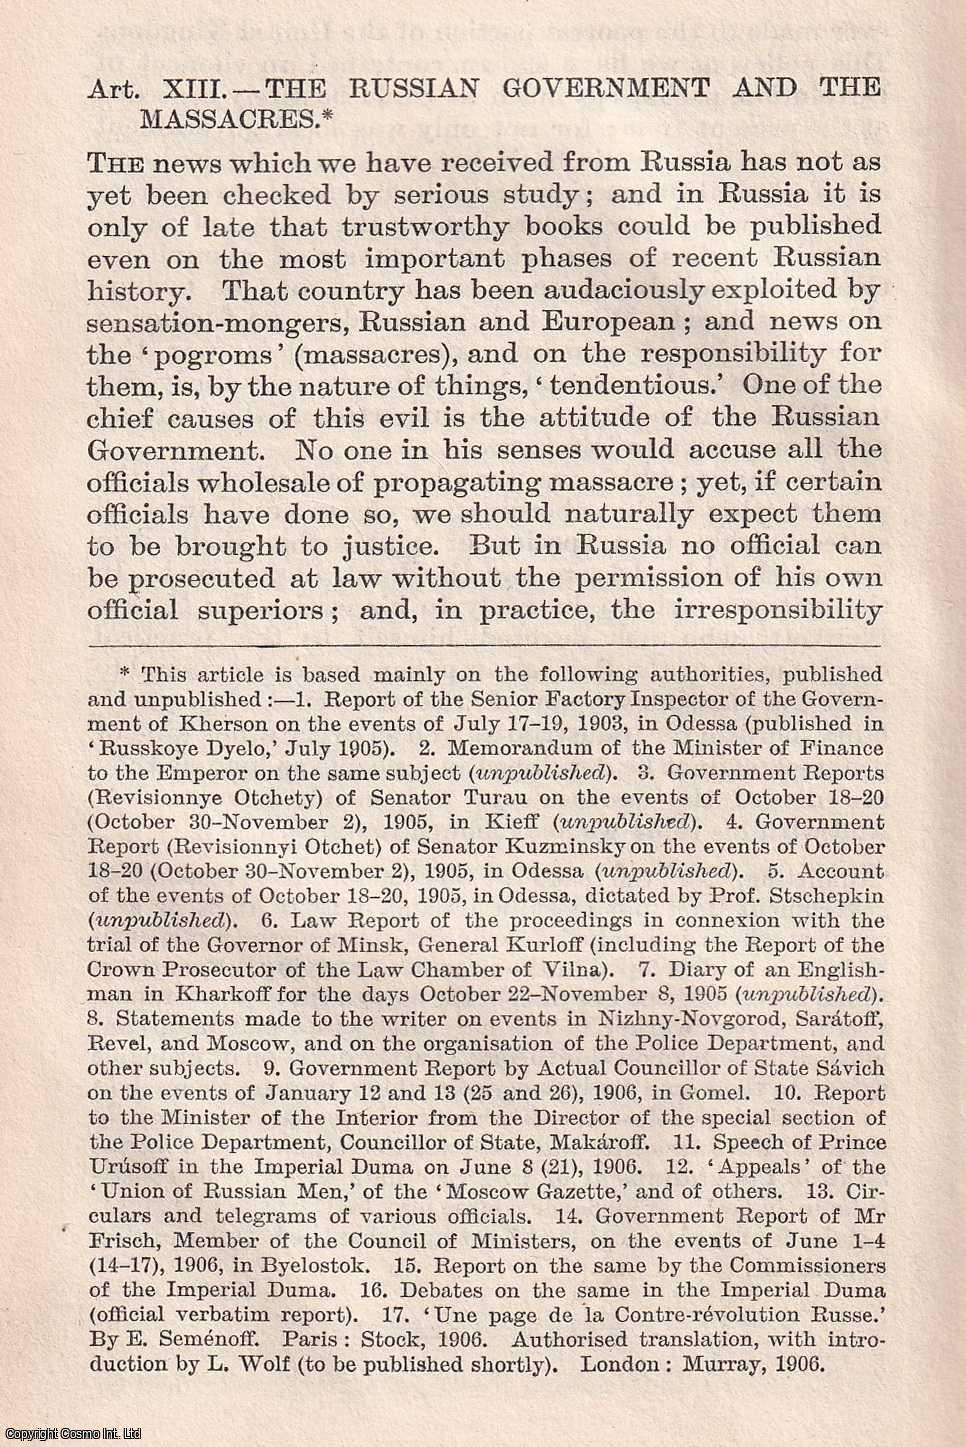 The Quarterly Review - The Russian Massacres. An uncommon original article from The Quarterly Review, 1906.